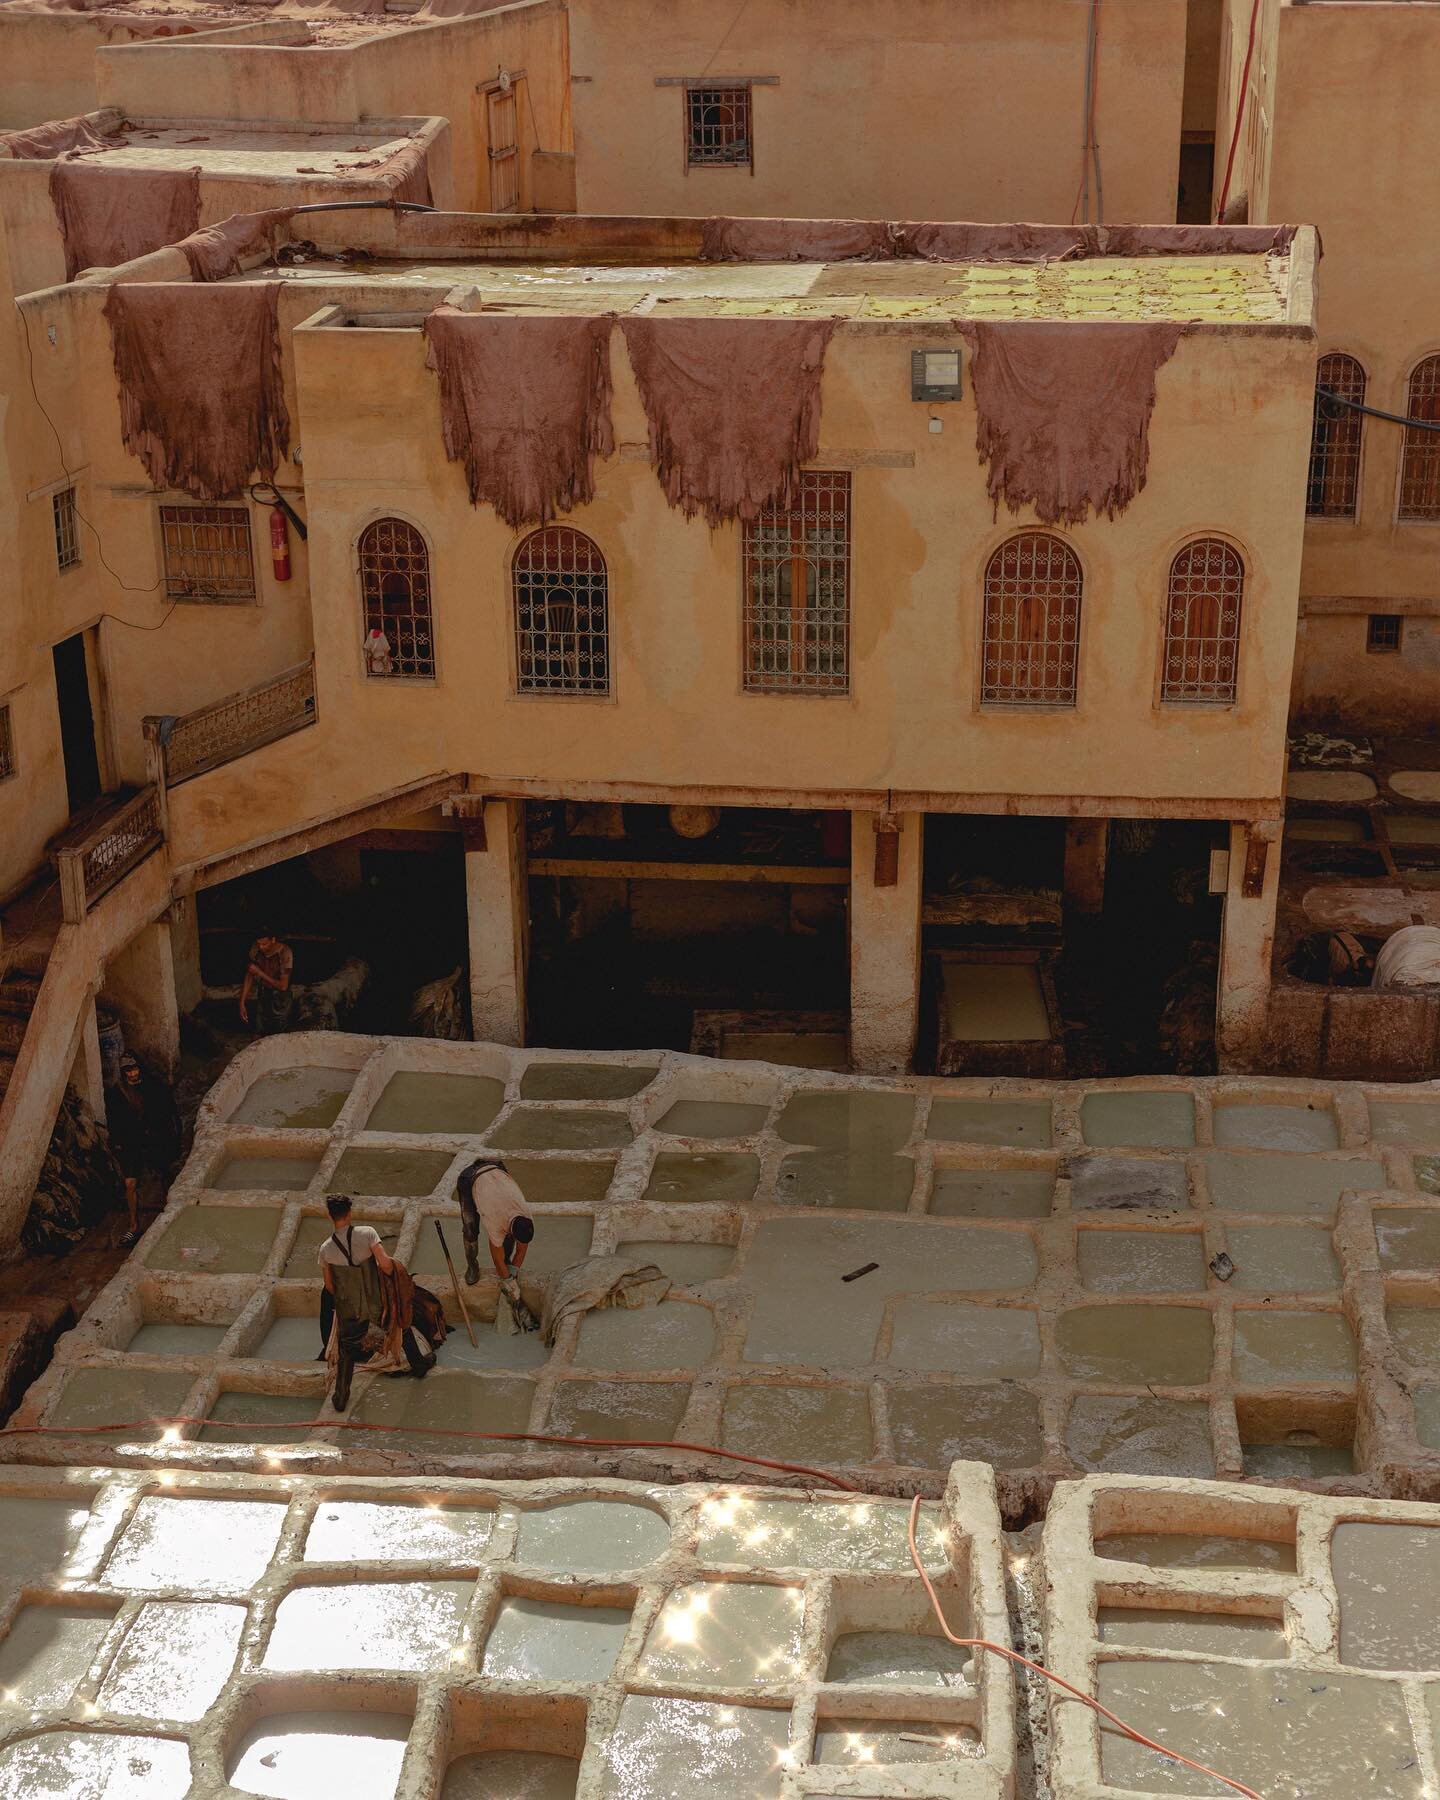 the tannery. the largest and one of the oldest in the city of fez, morocco. the animal hides are processed by first soaking in these stone vats that are mixed with (it&rsquo;s not pretty) pigeon feces, among other things, to clean and soften the skin